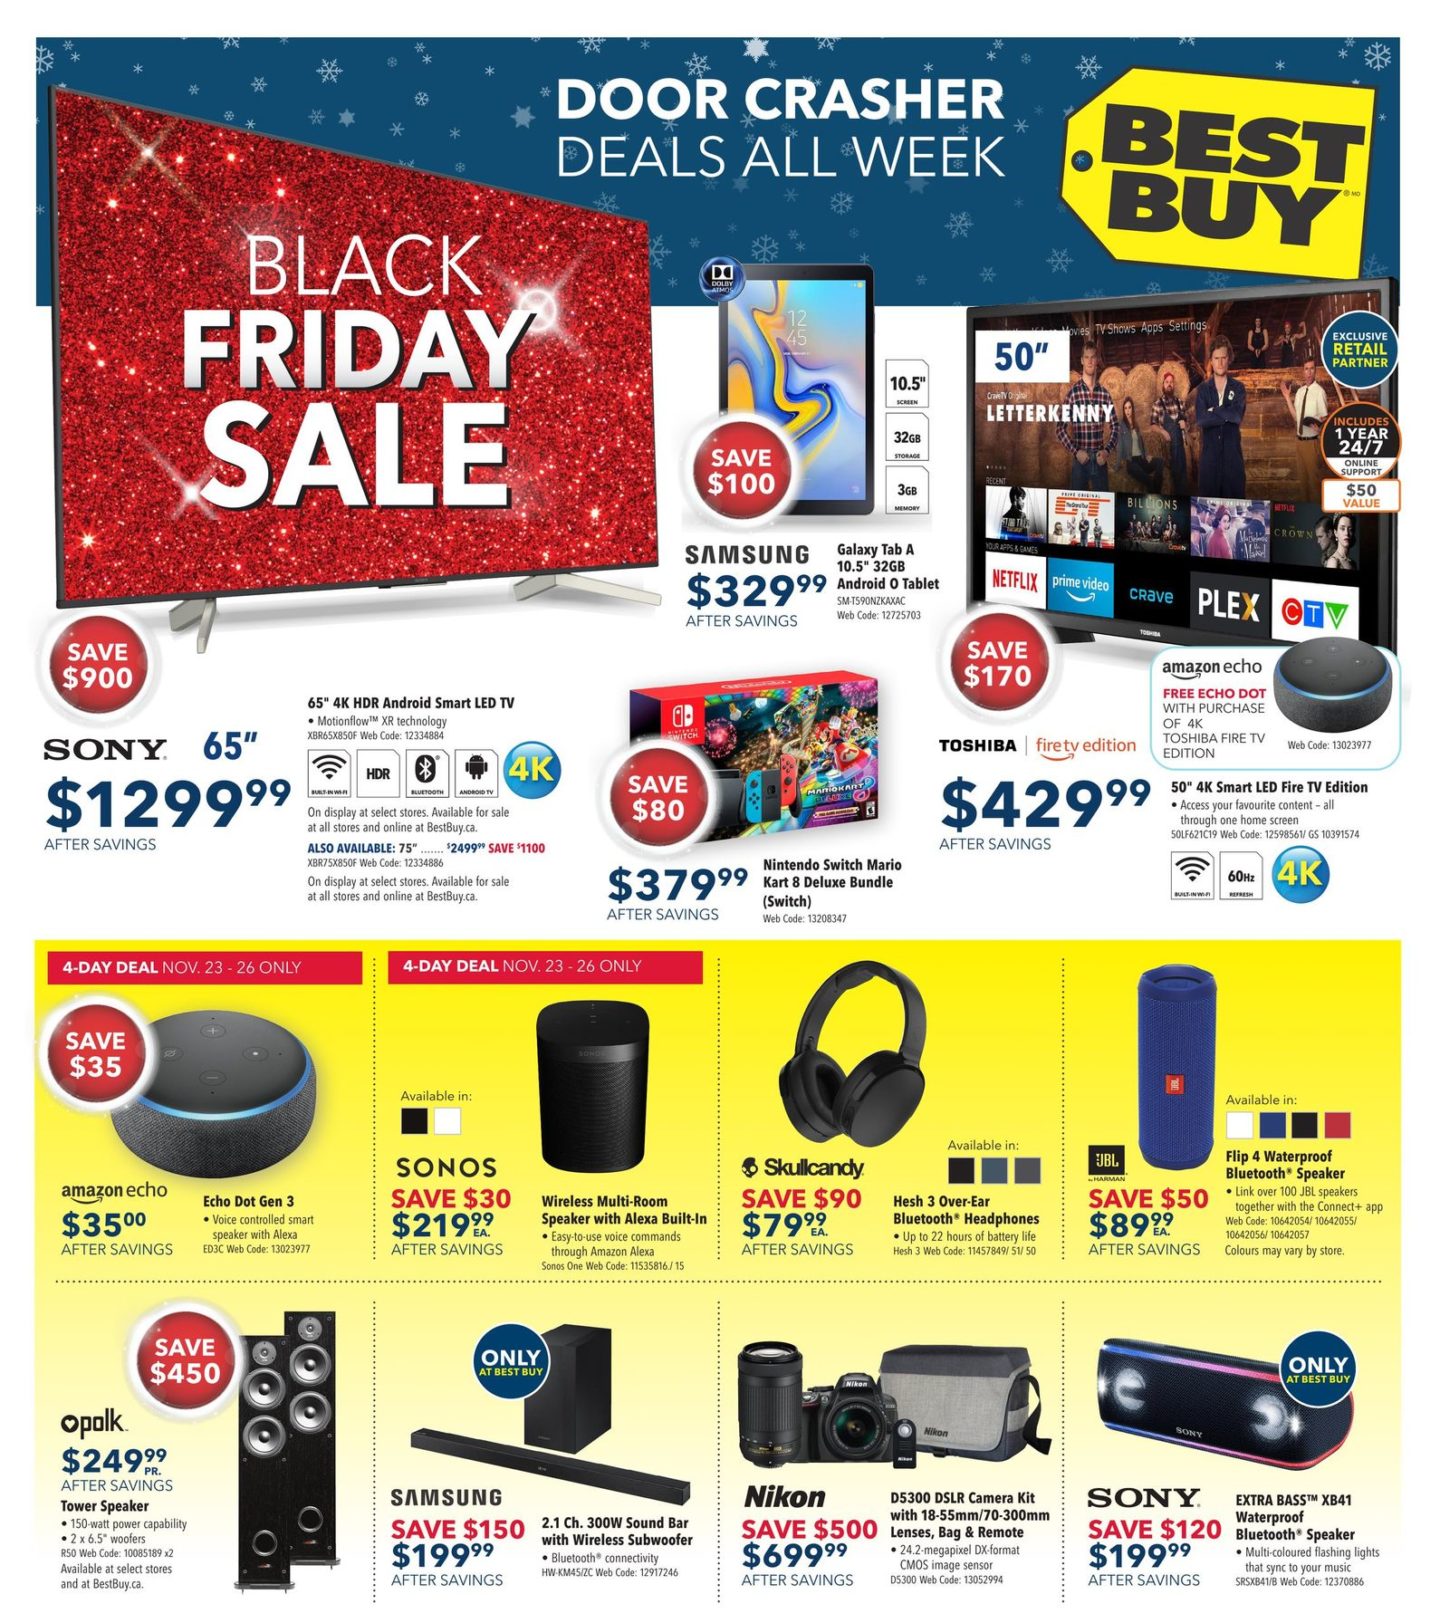 Best Buy Black Friday Flyer Deals 2019 Canada - Where The Best Deals For Black Friday